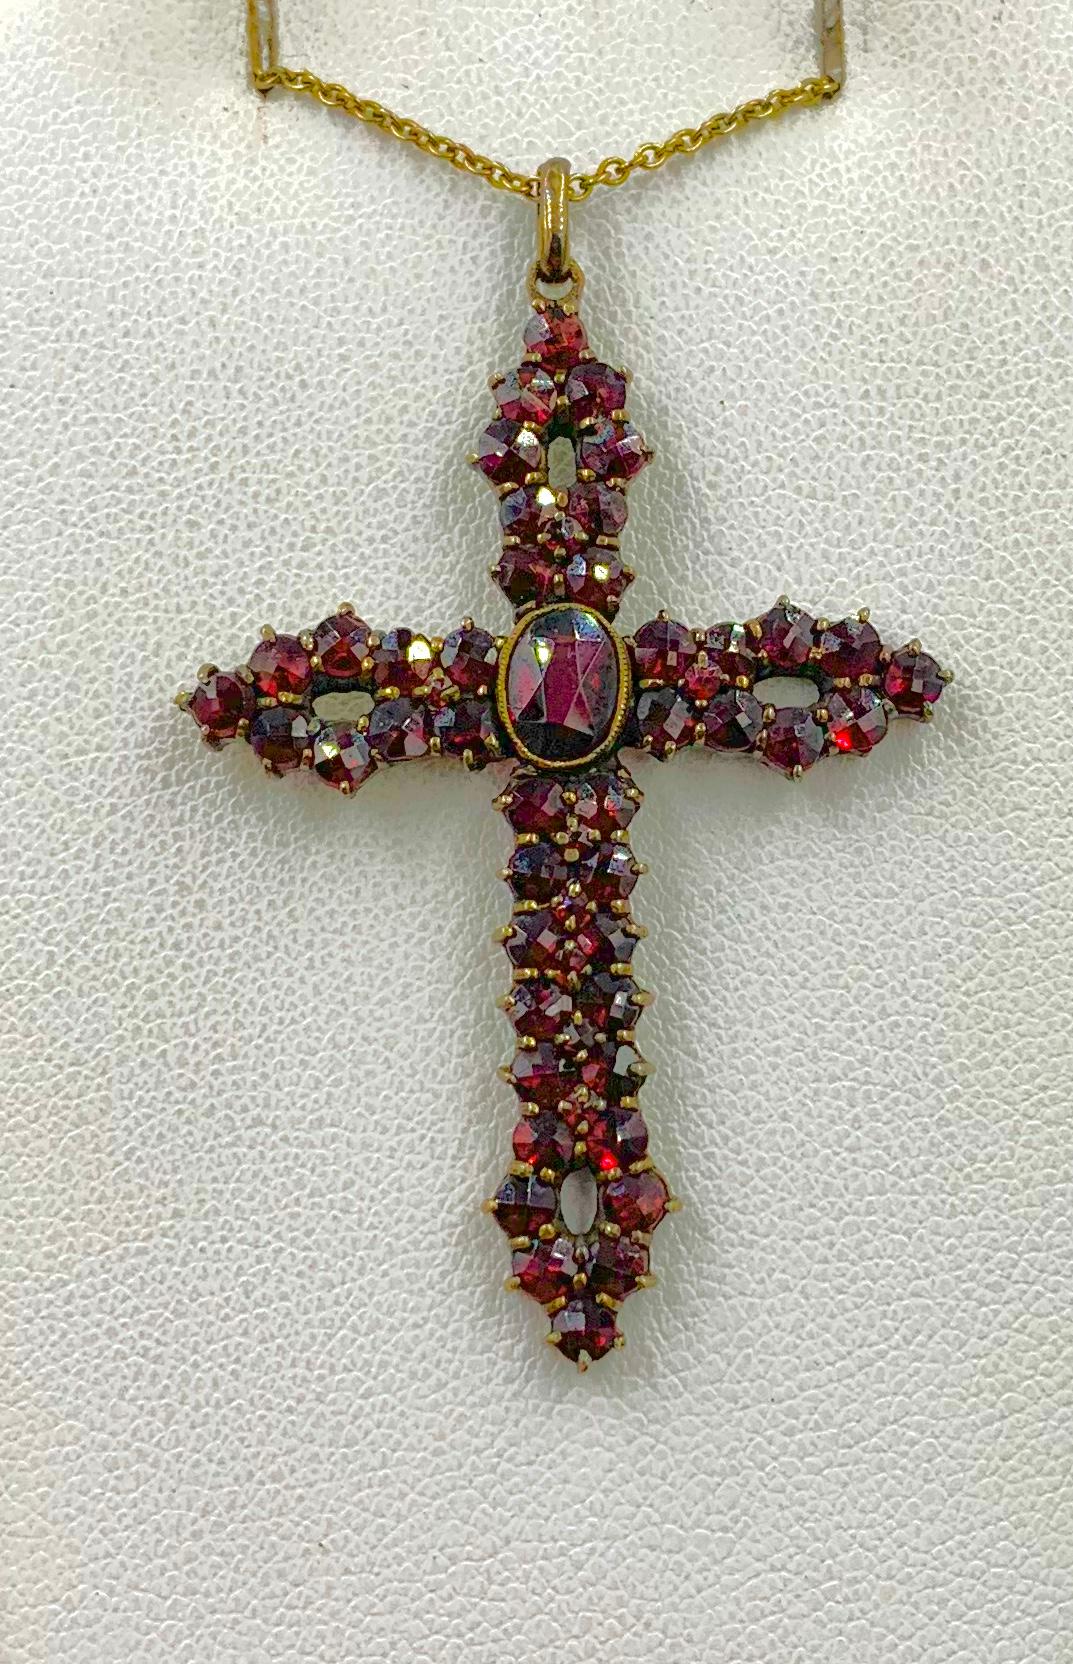 The Victorian Garnet Cross Pendant is a masterpiece of Victorian Garnet Jewelry.  It has a beautiful cross in an open work design set with stunning faceted natural mined Bohemian Garnets.  The beautiful garnets have the most fabulous blood red color